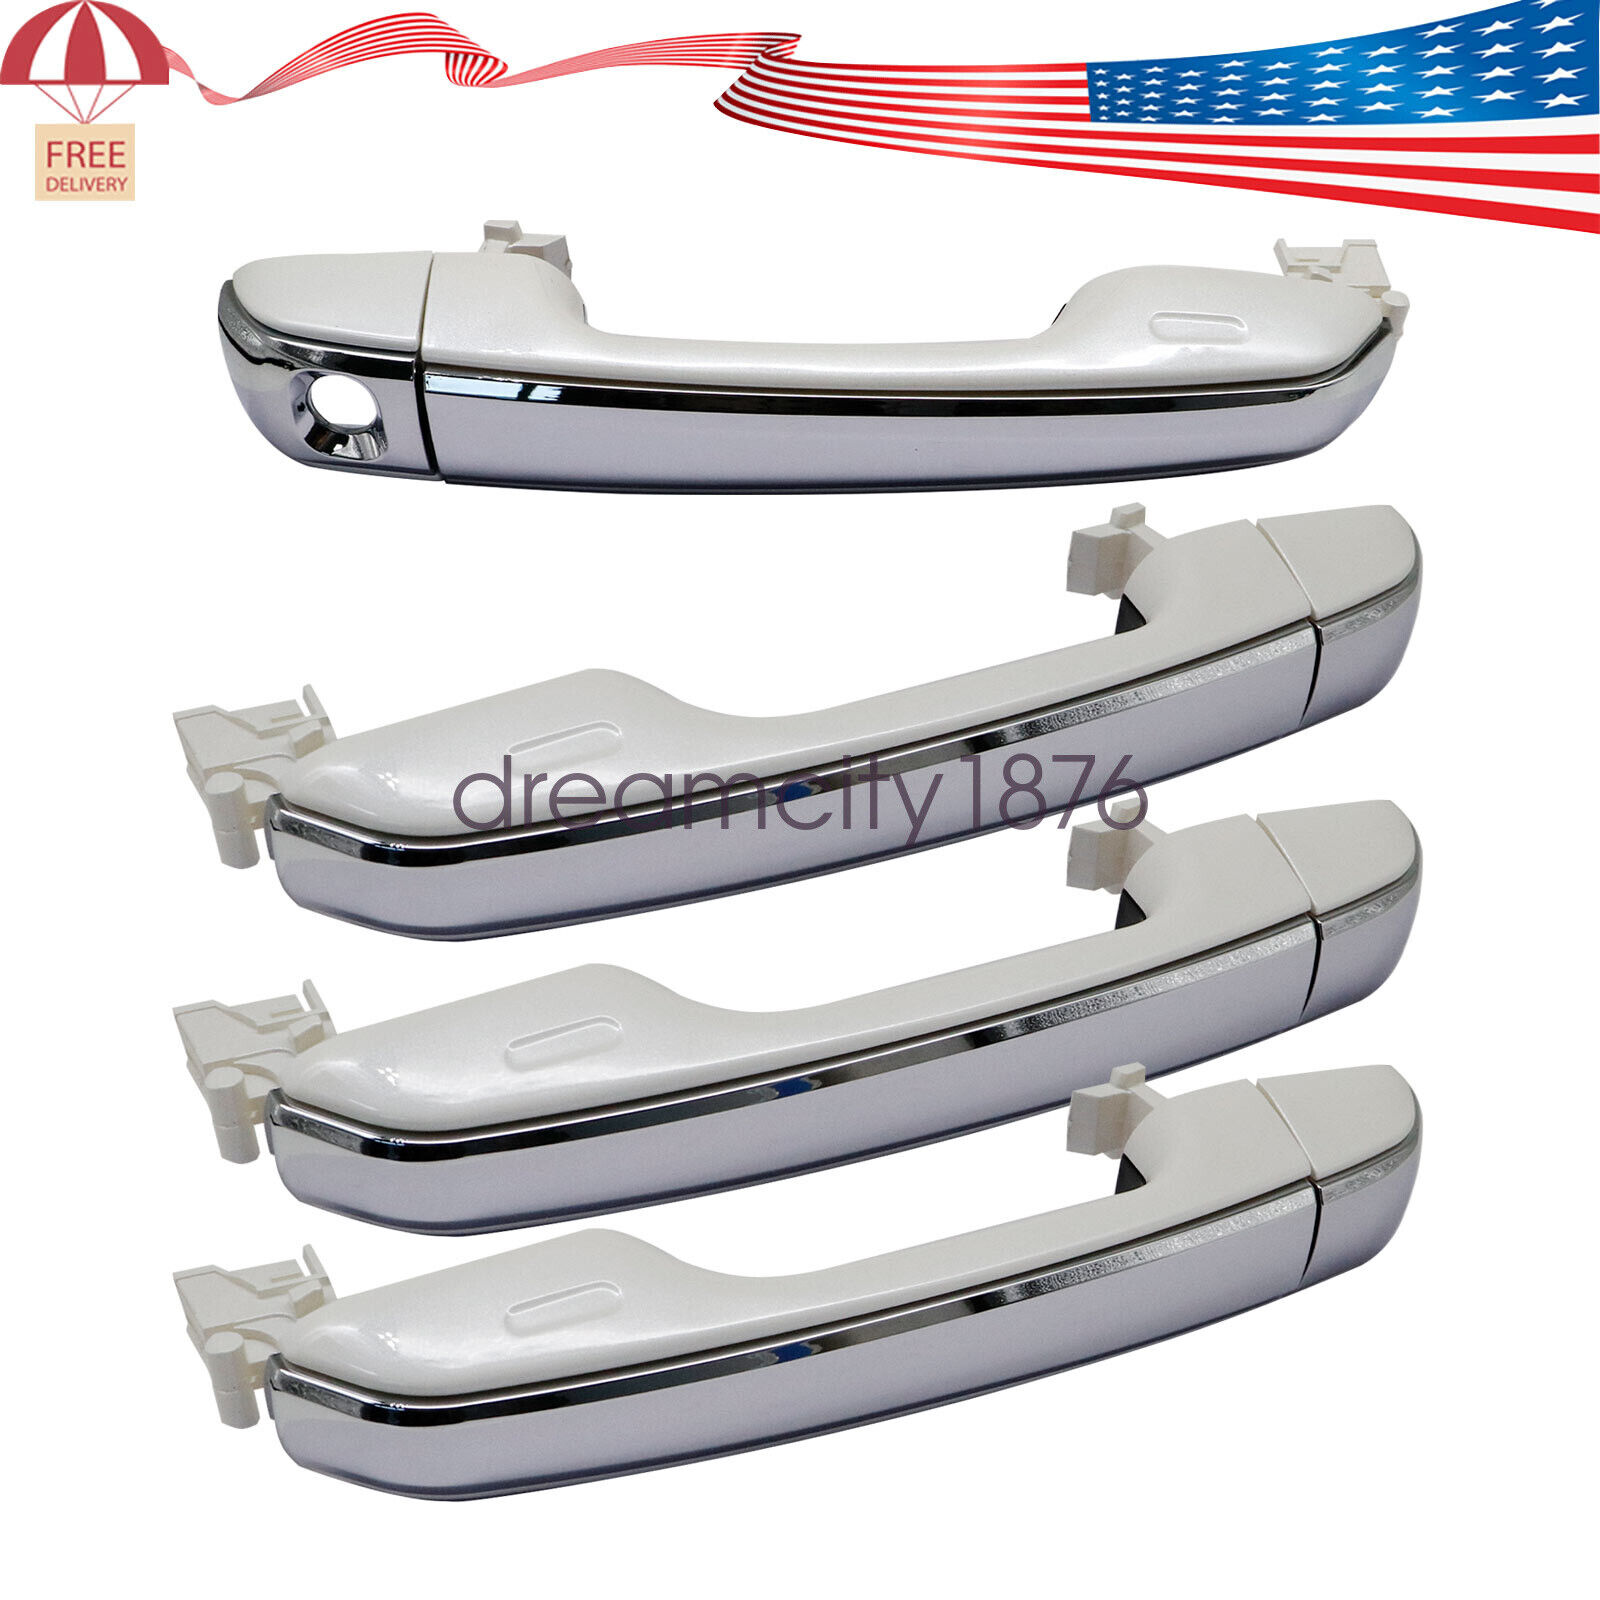 4pcs Starfire Pearl Outer Door Handle For Lexus GX460 2010-2018 New